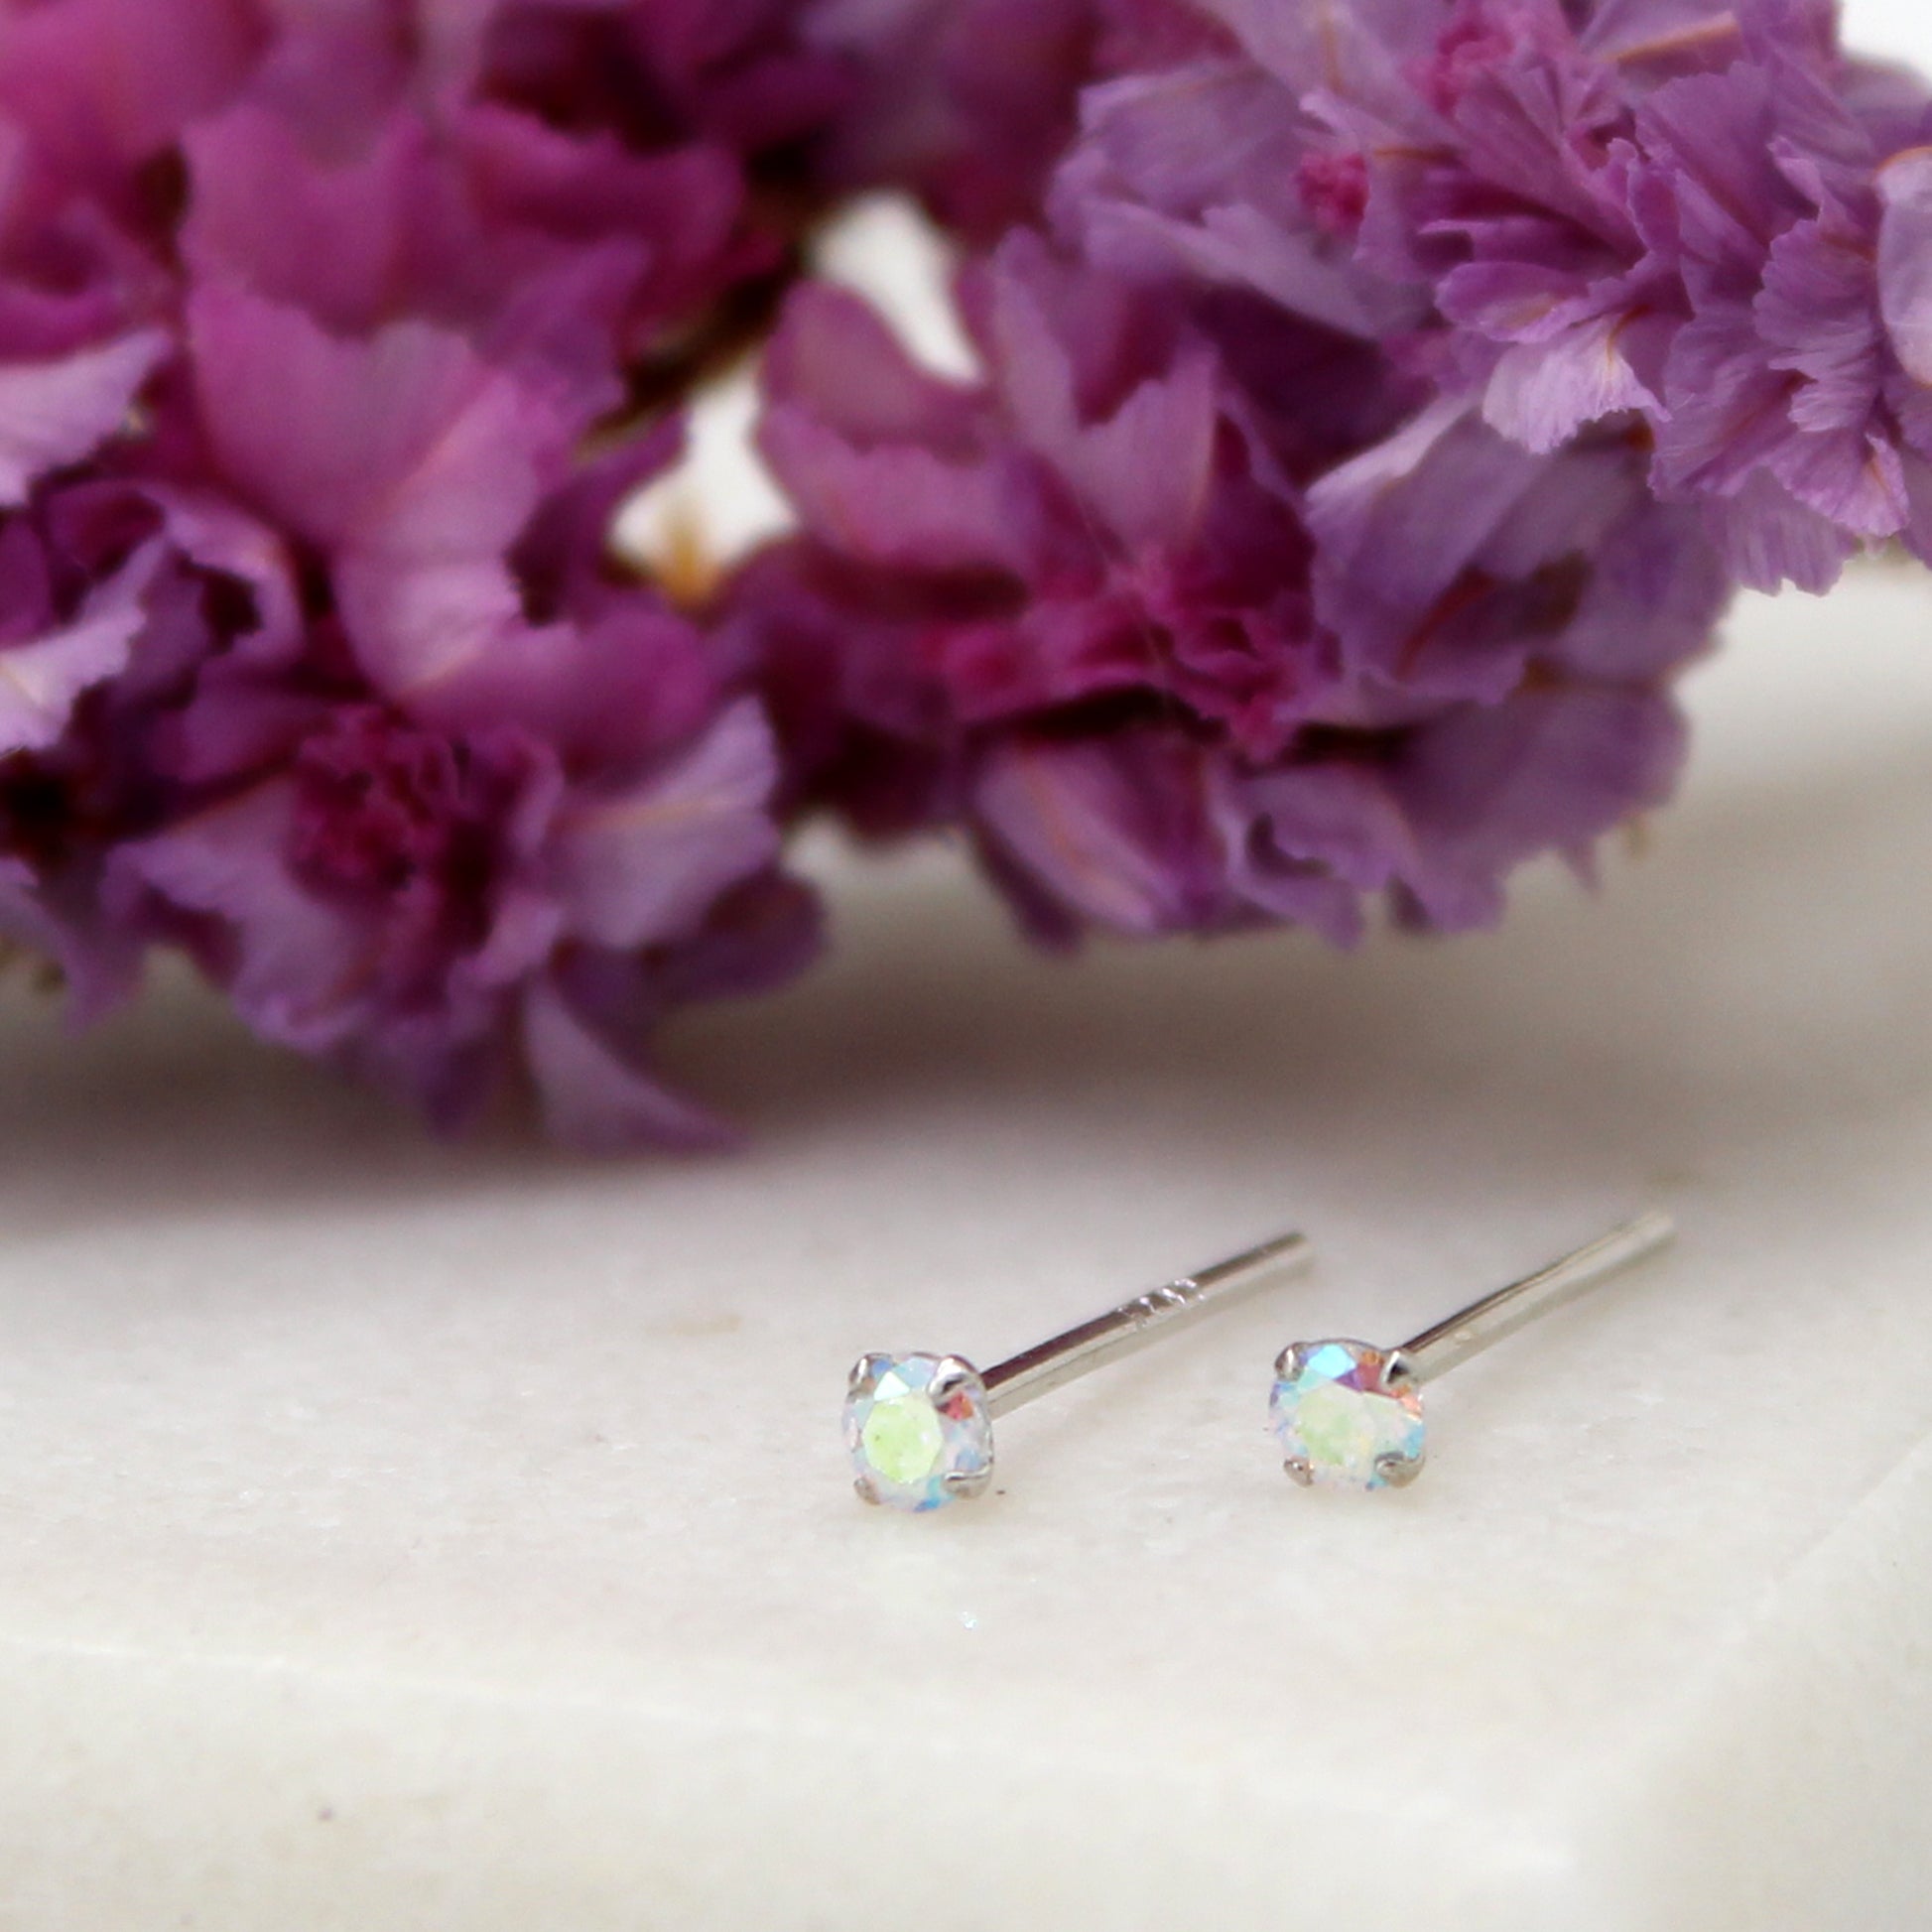 Sterling Silver Tiny Iridescent Gem Stud Earrings